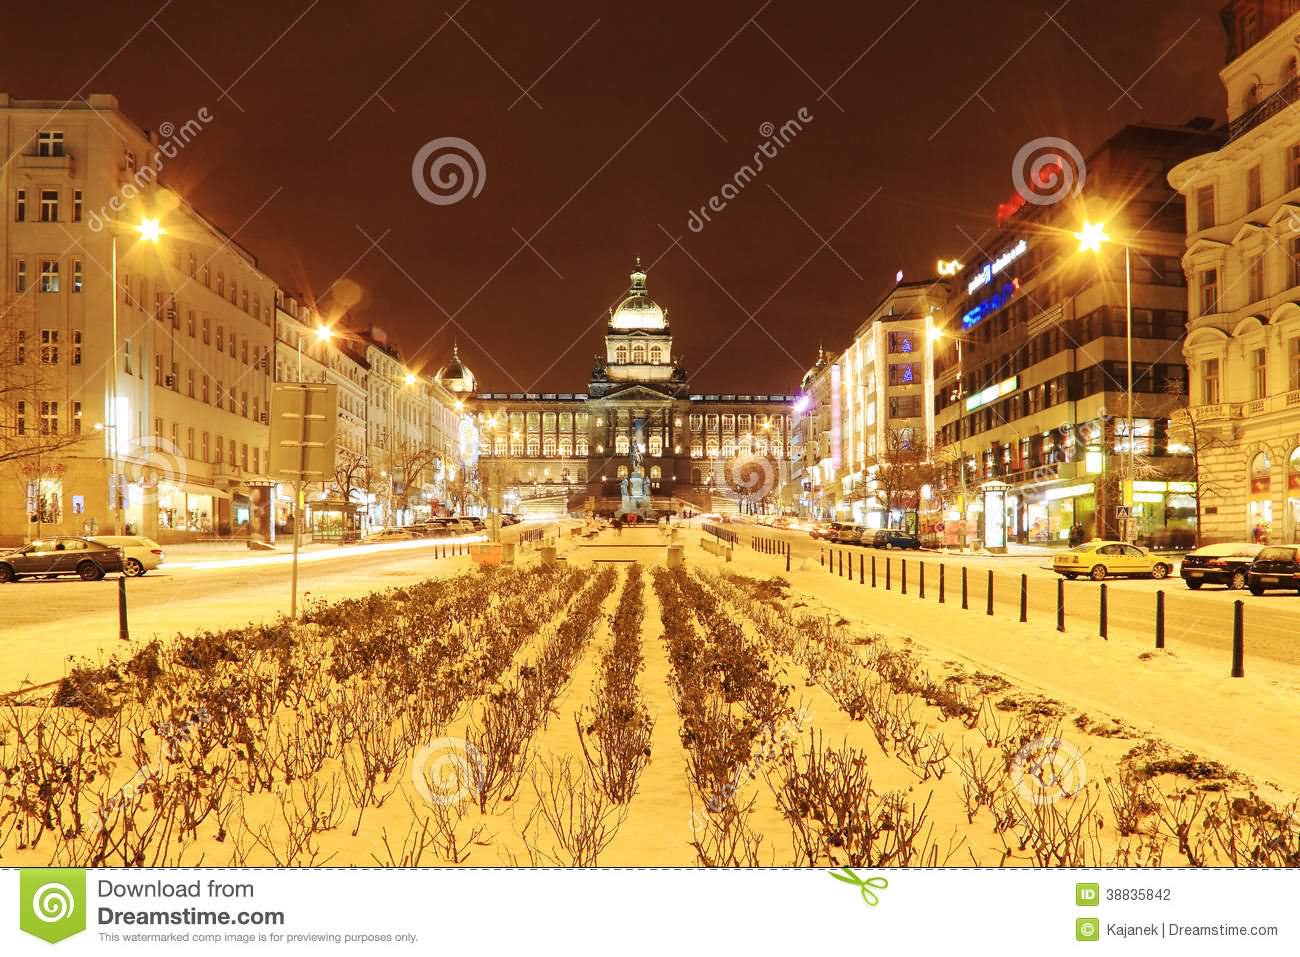 Snowy Wenceslas Square In The Night